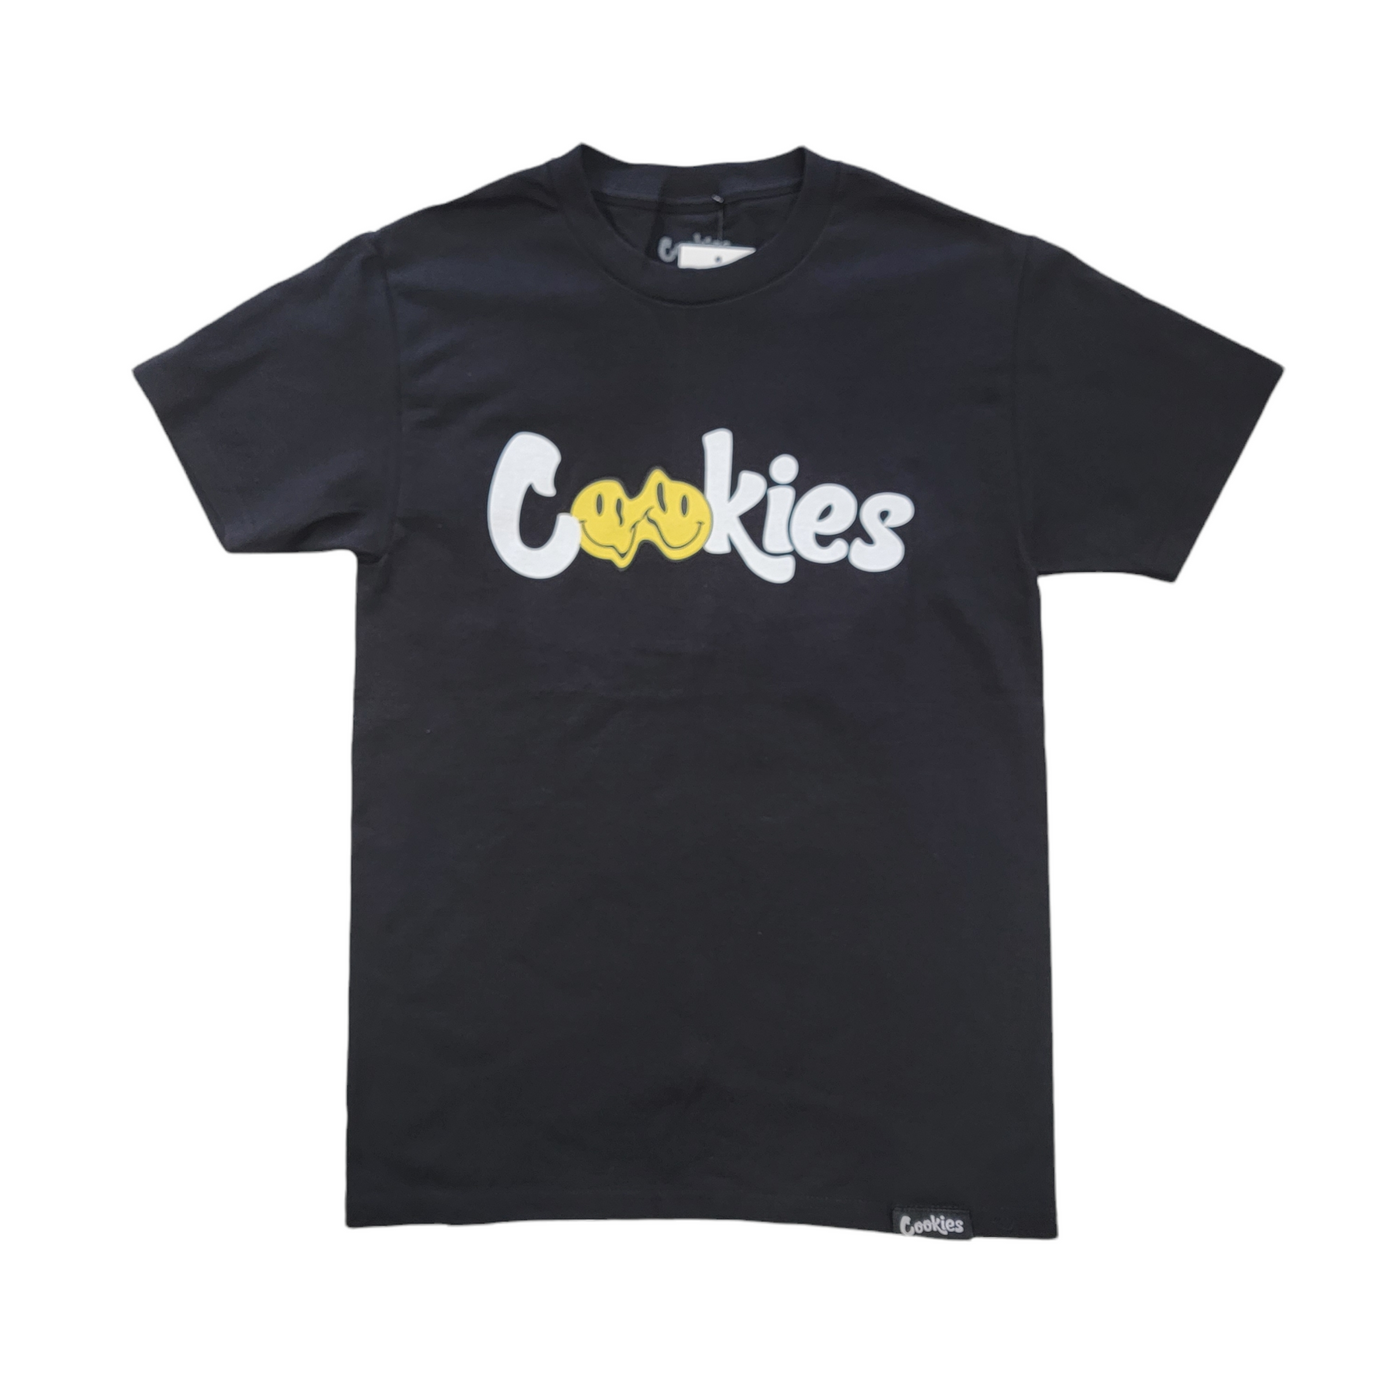 Cookies Melted Smile T-Shirt Black